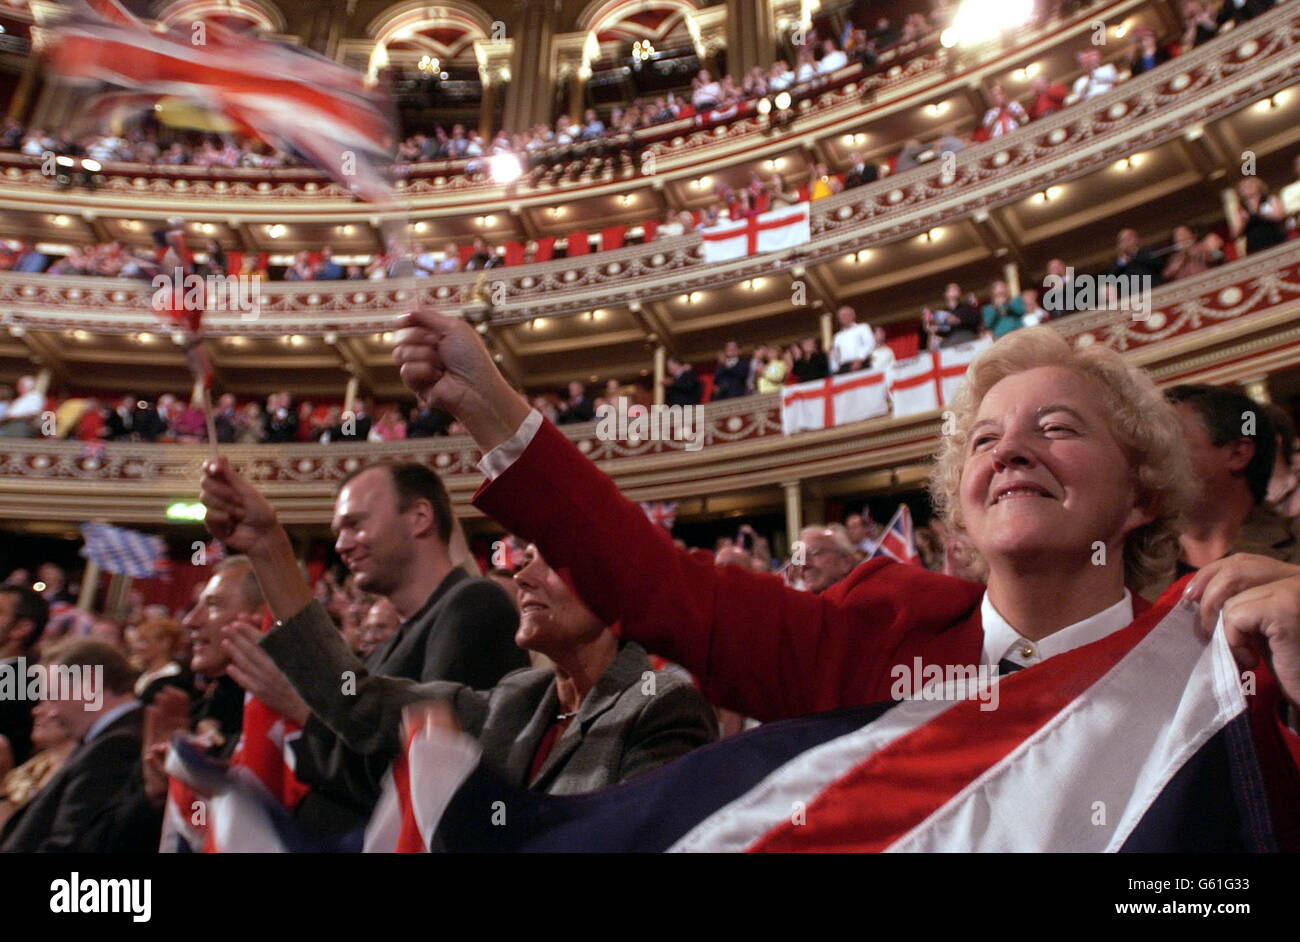 Marlene Burt from Bexley in Kent waves her flag as the BBC Orchestra plays 'Rule Britannia' as a finale at The Last Night of the Proms,in the Royal Albert Hall, London. 13/09/2003: The BBC's annual classical music season reaches its traditional rousing climax tonight, Saturday 13th September 2003, as revellers celebrate the Last Night Of The Proms. For the first time, as well as the chest-swelling celebrations in London' s Royal Albert Hall there will be events in Scotland, Wales and Northern Ireland. The Last Night - which features anthems as Land of Hope And Glory and Jerusalem - rounds off Stock Photo